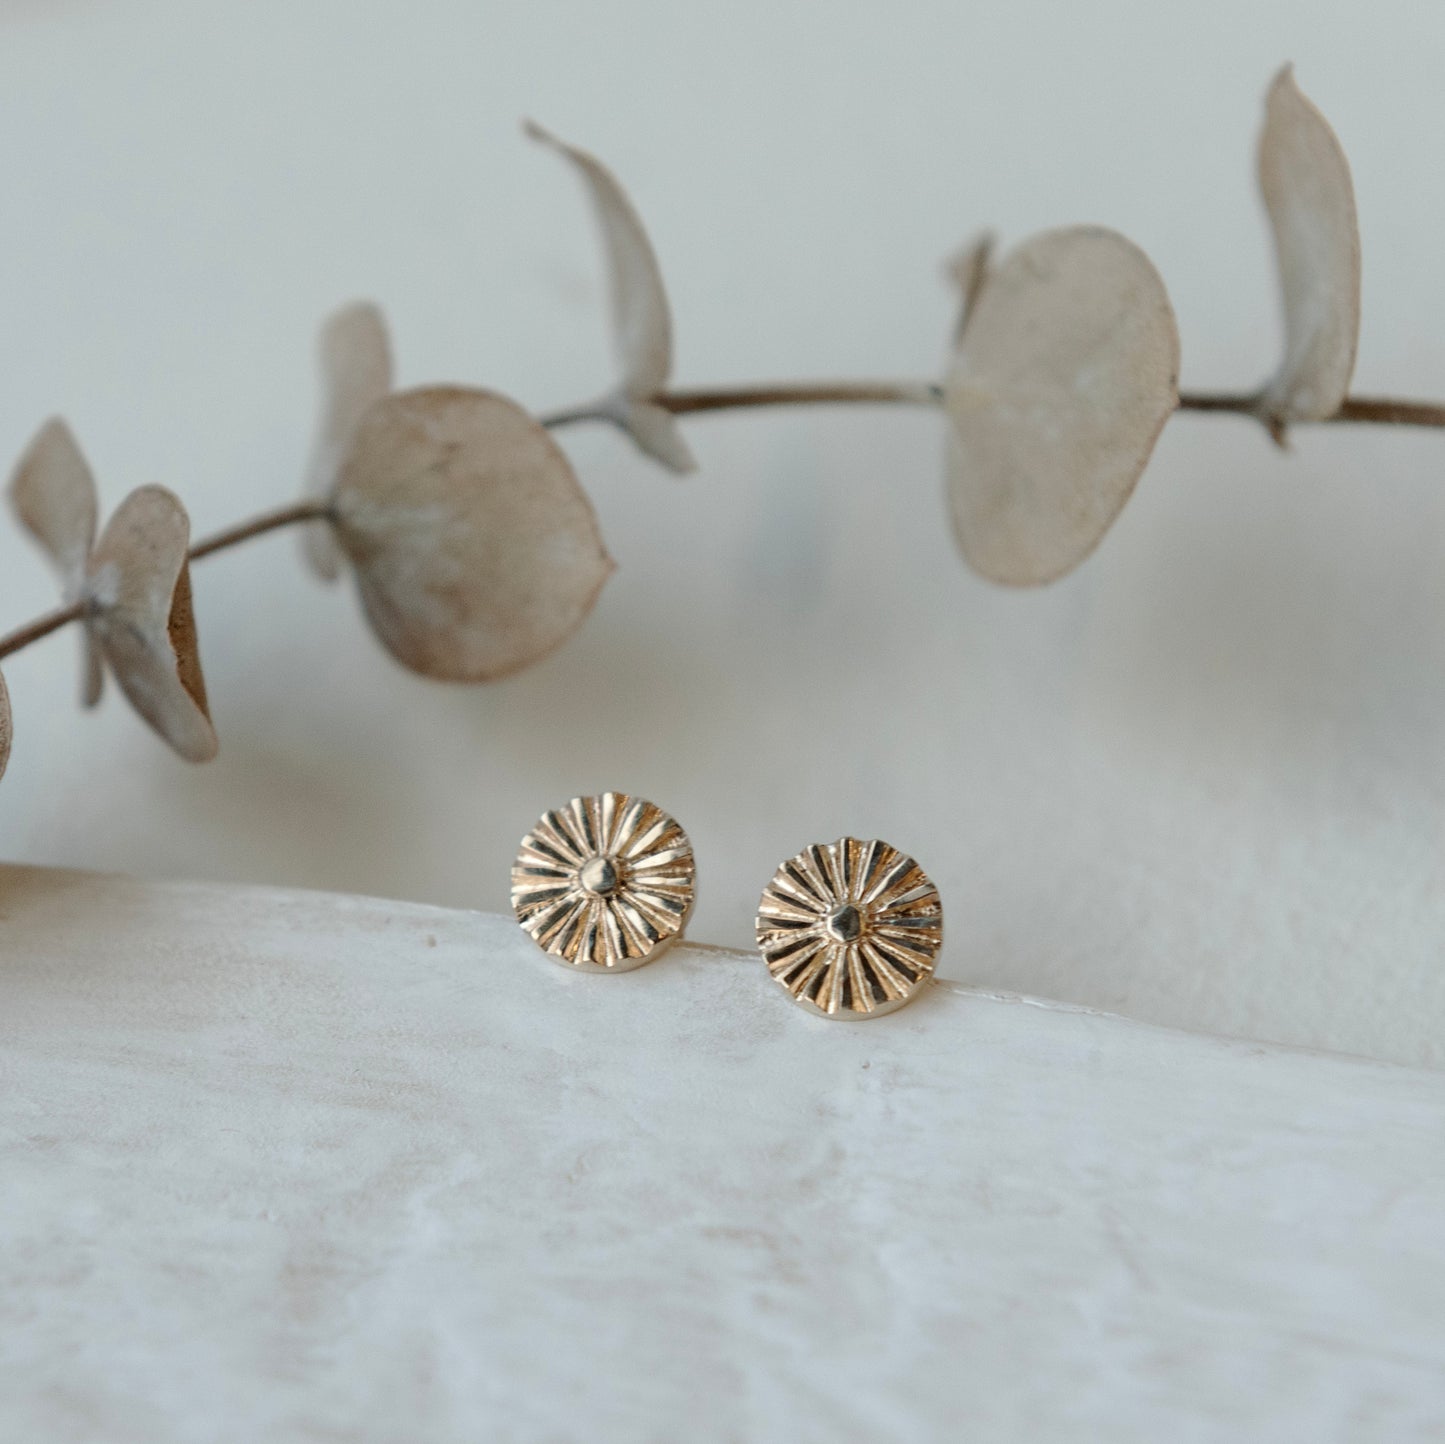 Andrea Mueller, "The Daisies" Studs in Gold